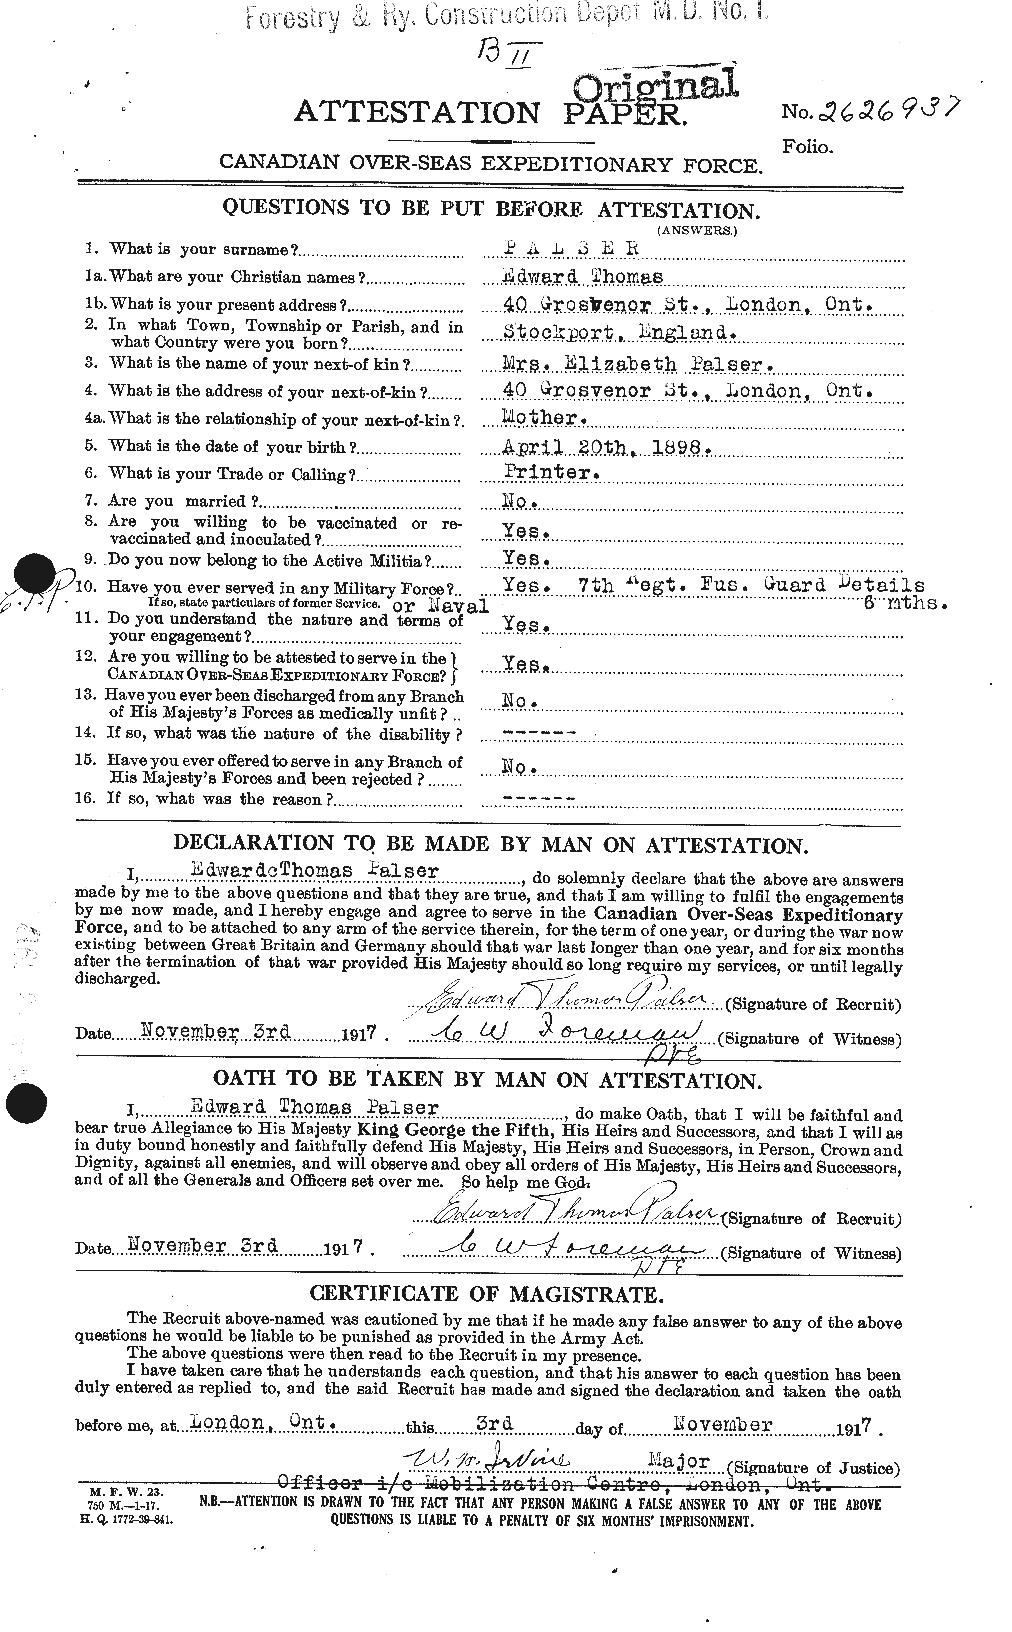 Personnel Records of the First World War - CEF 563274a